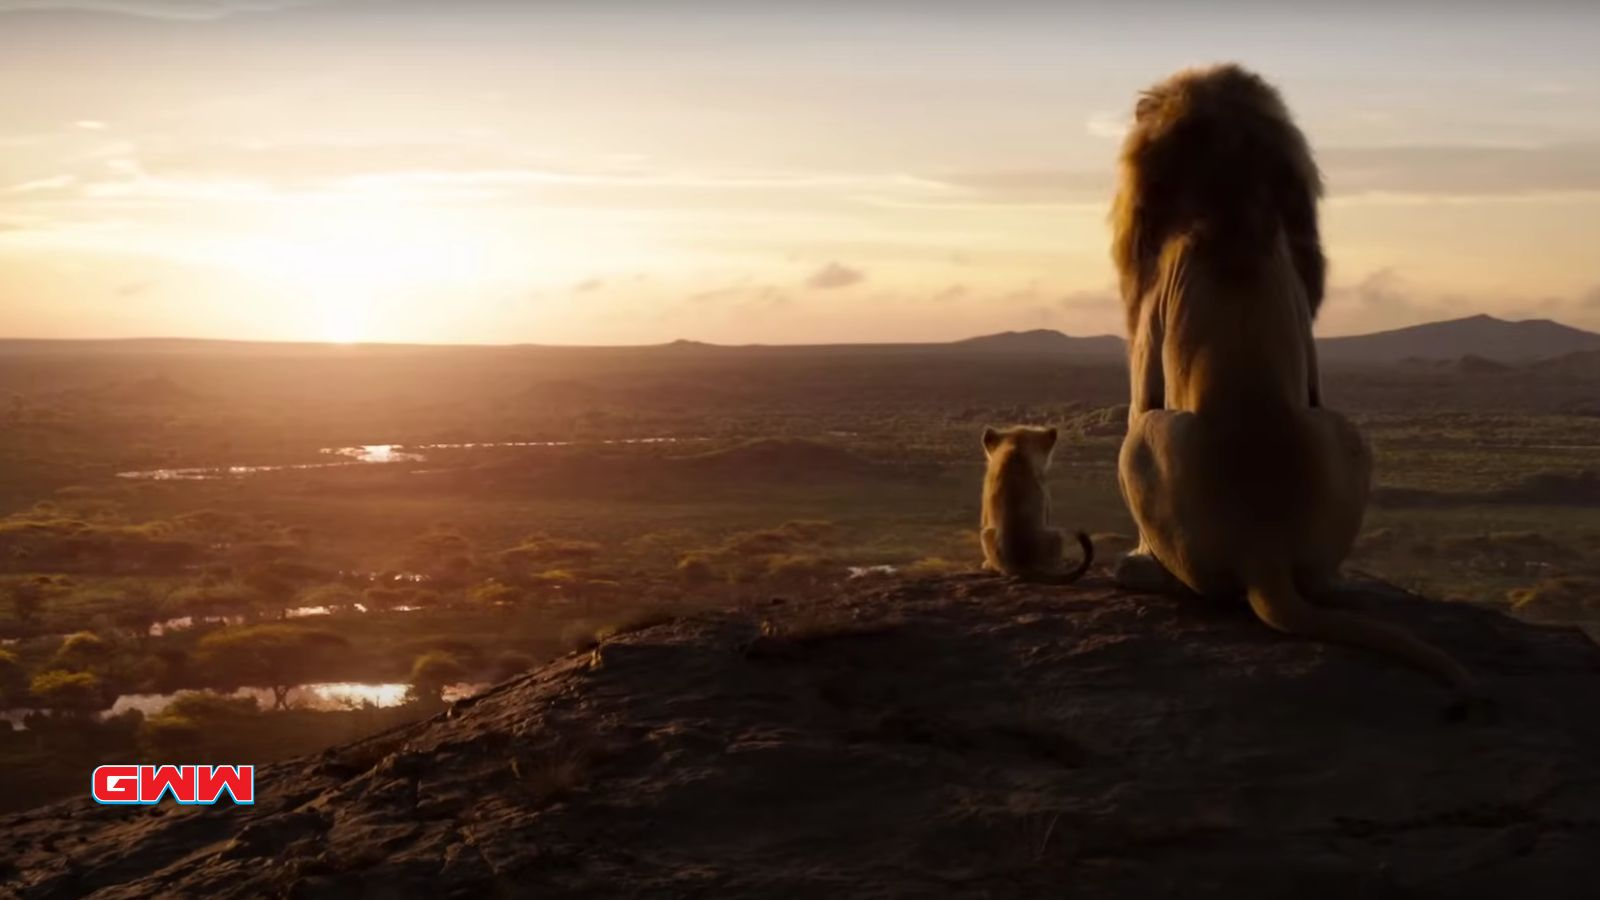 Mufasa and young Simba looking over Pride Lands, Mufasa meaning